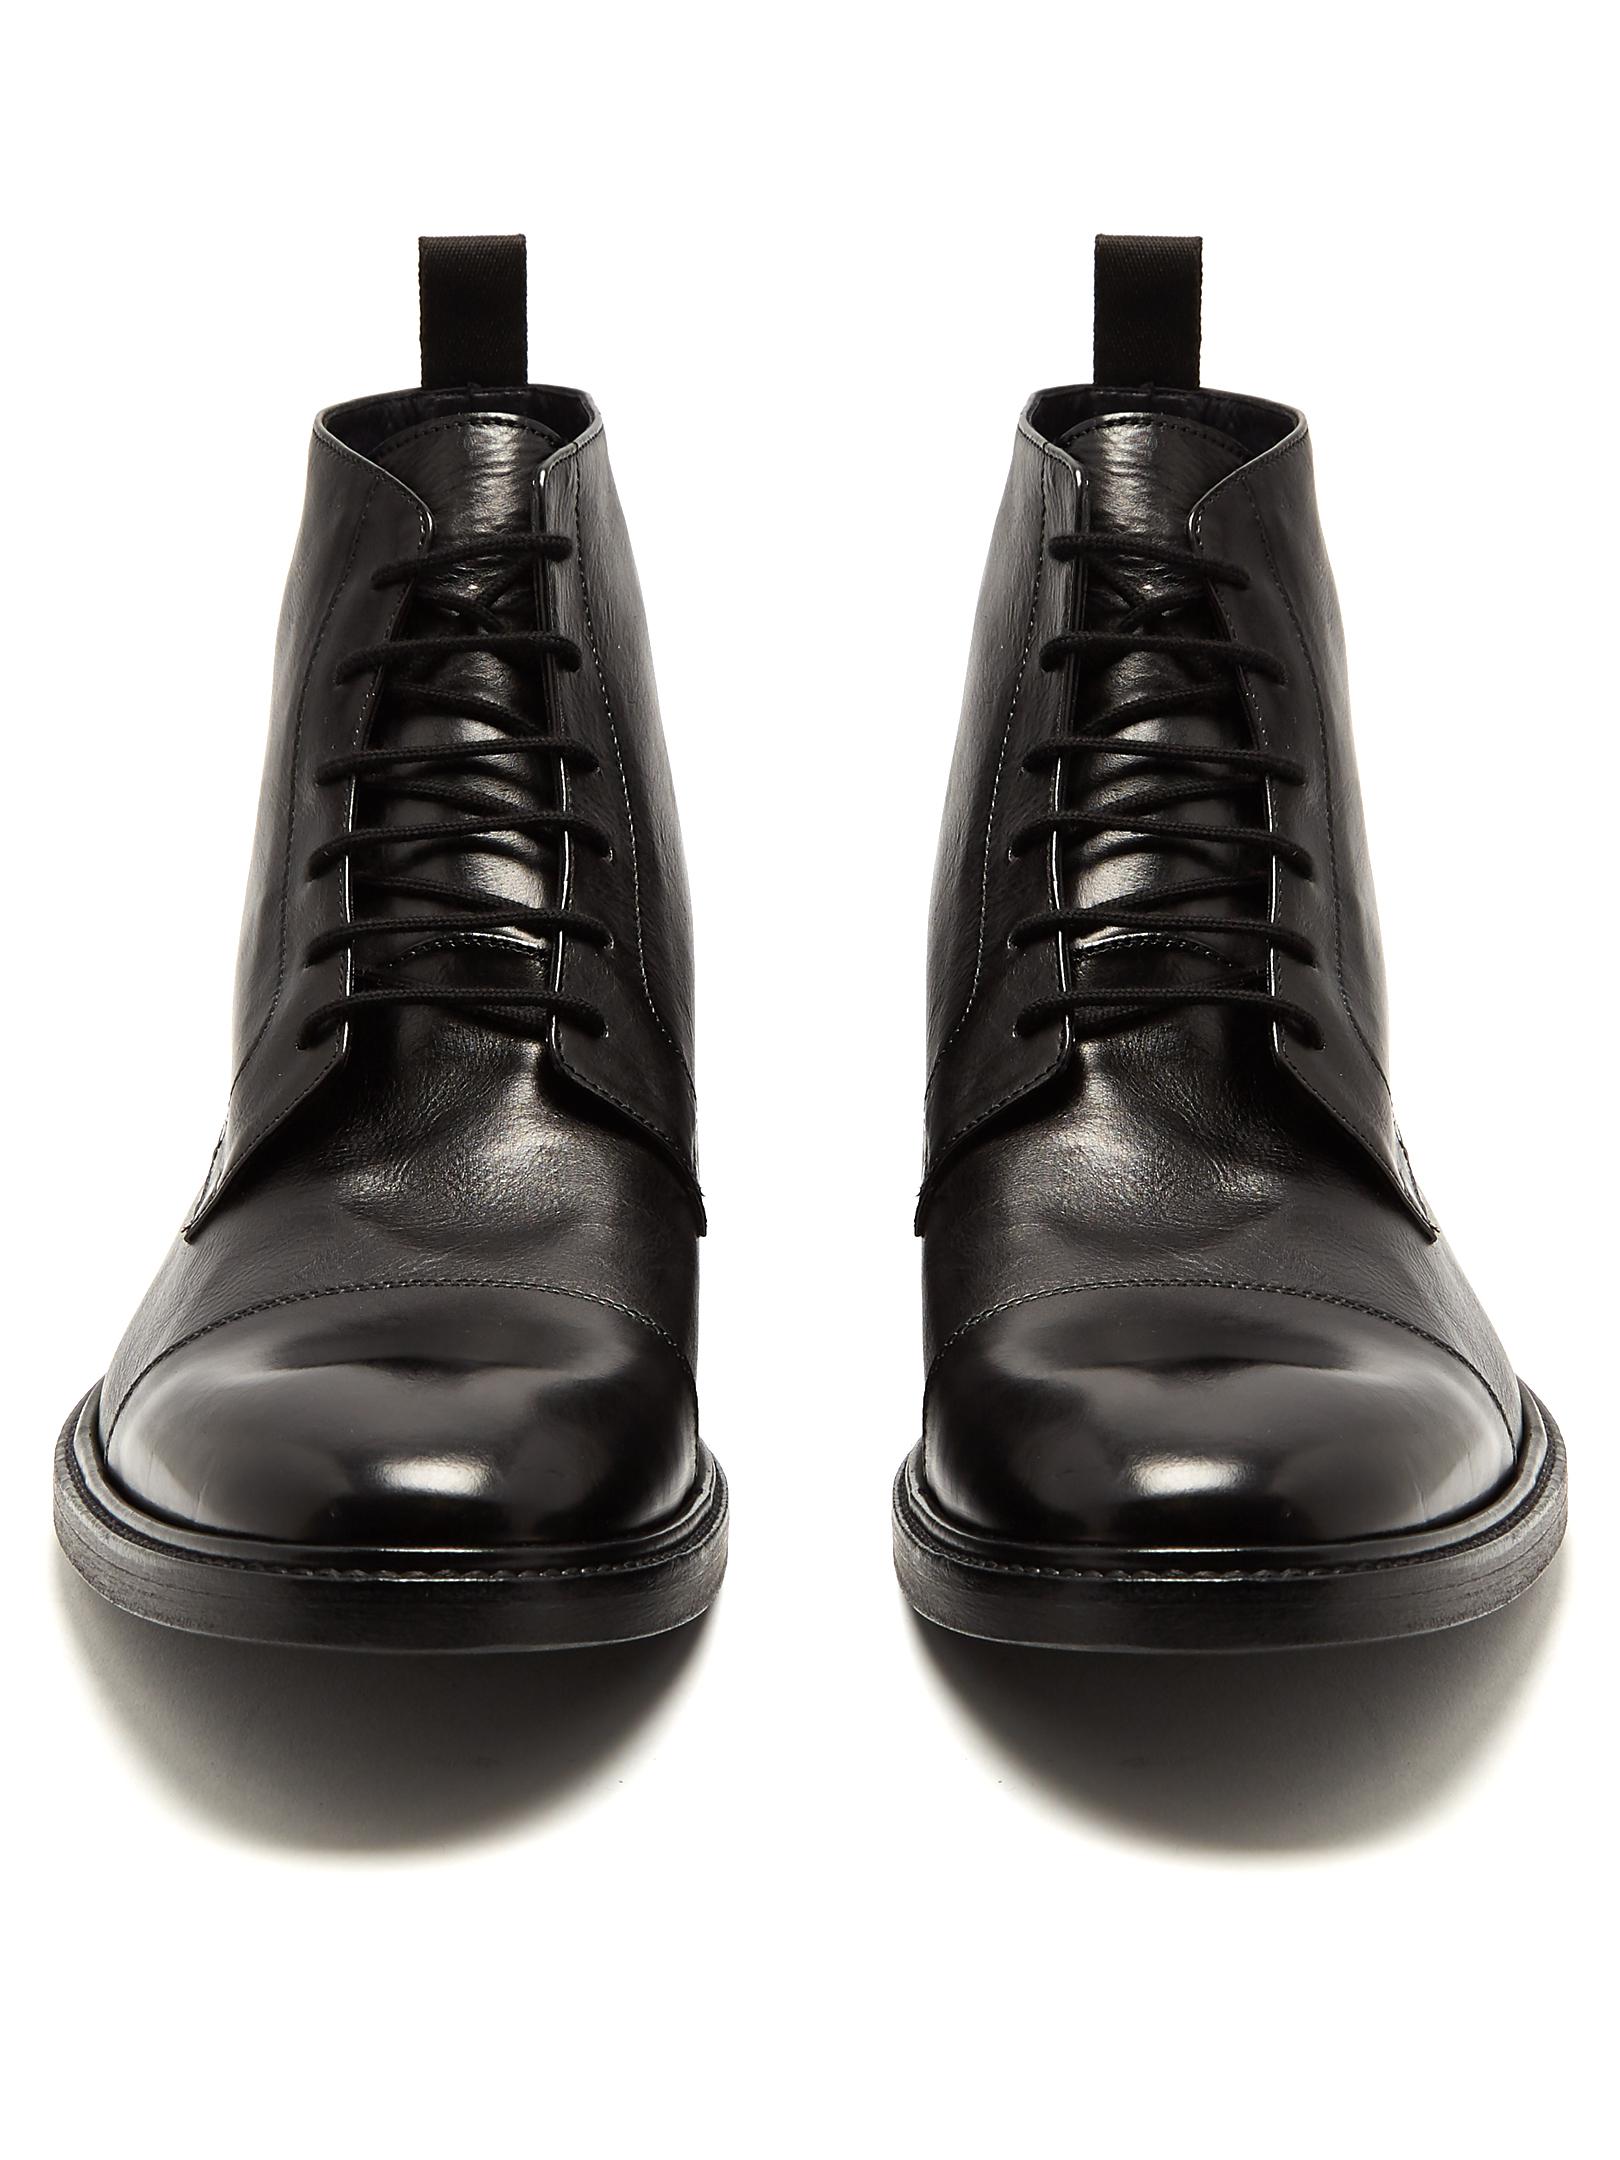 Paul Smith Jarman Cap-toe Leather Boots in Black for Men - Lyst